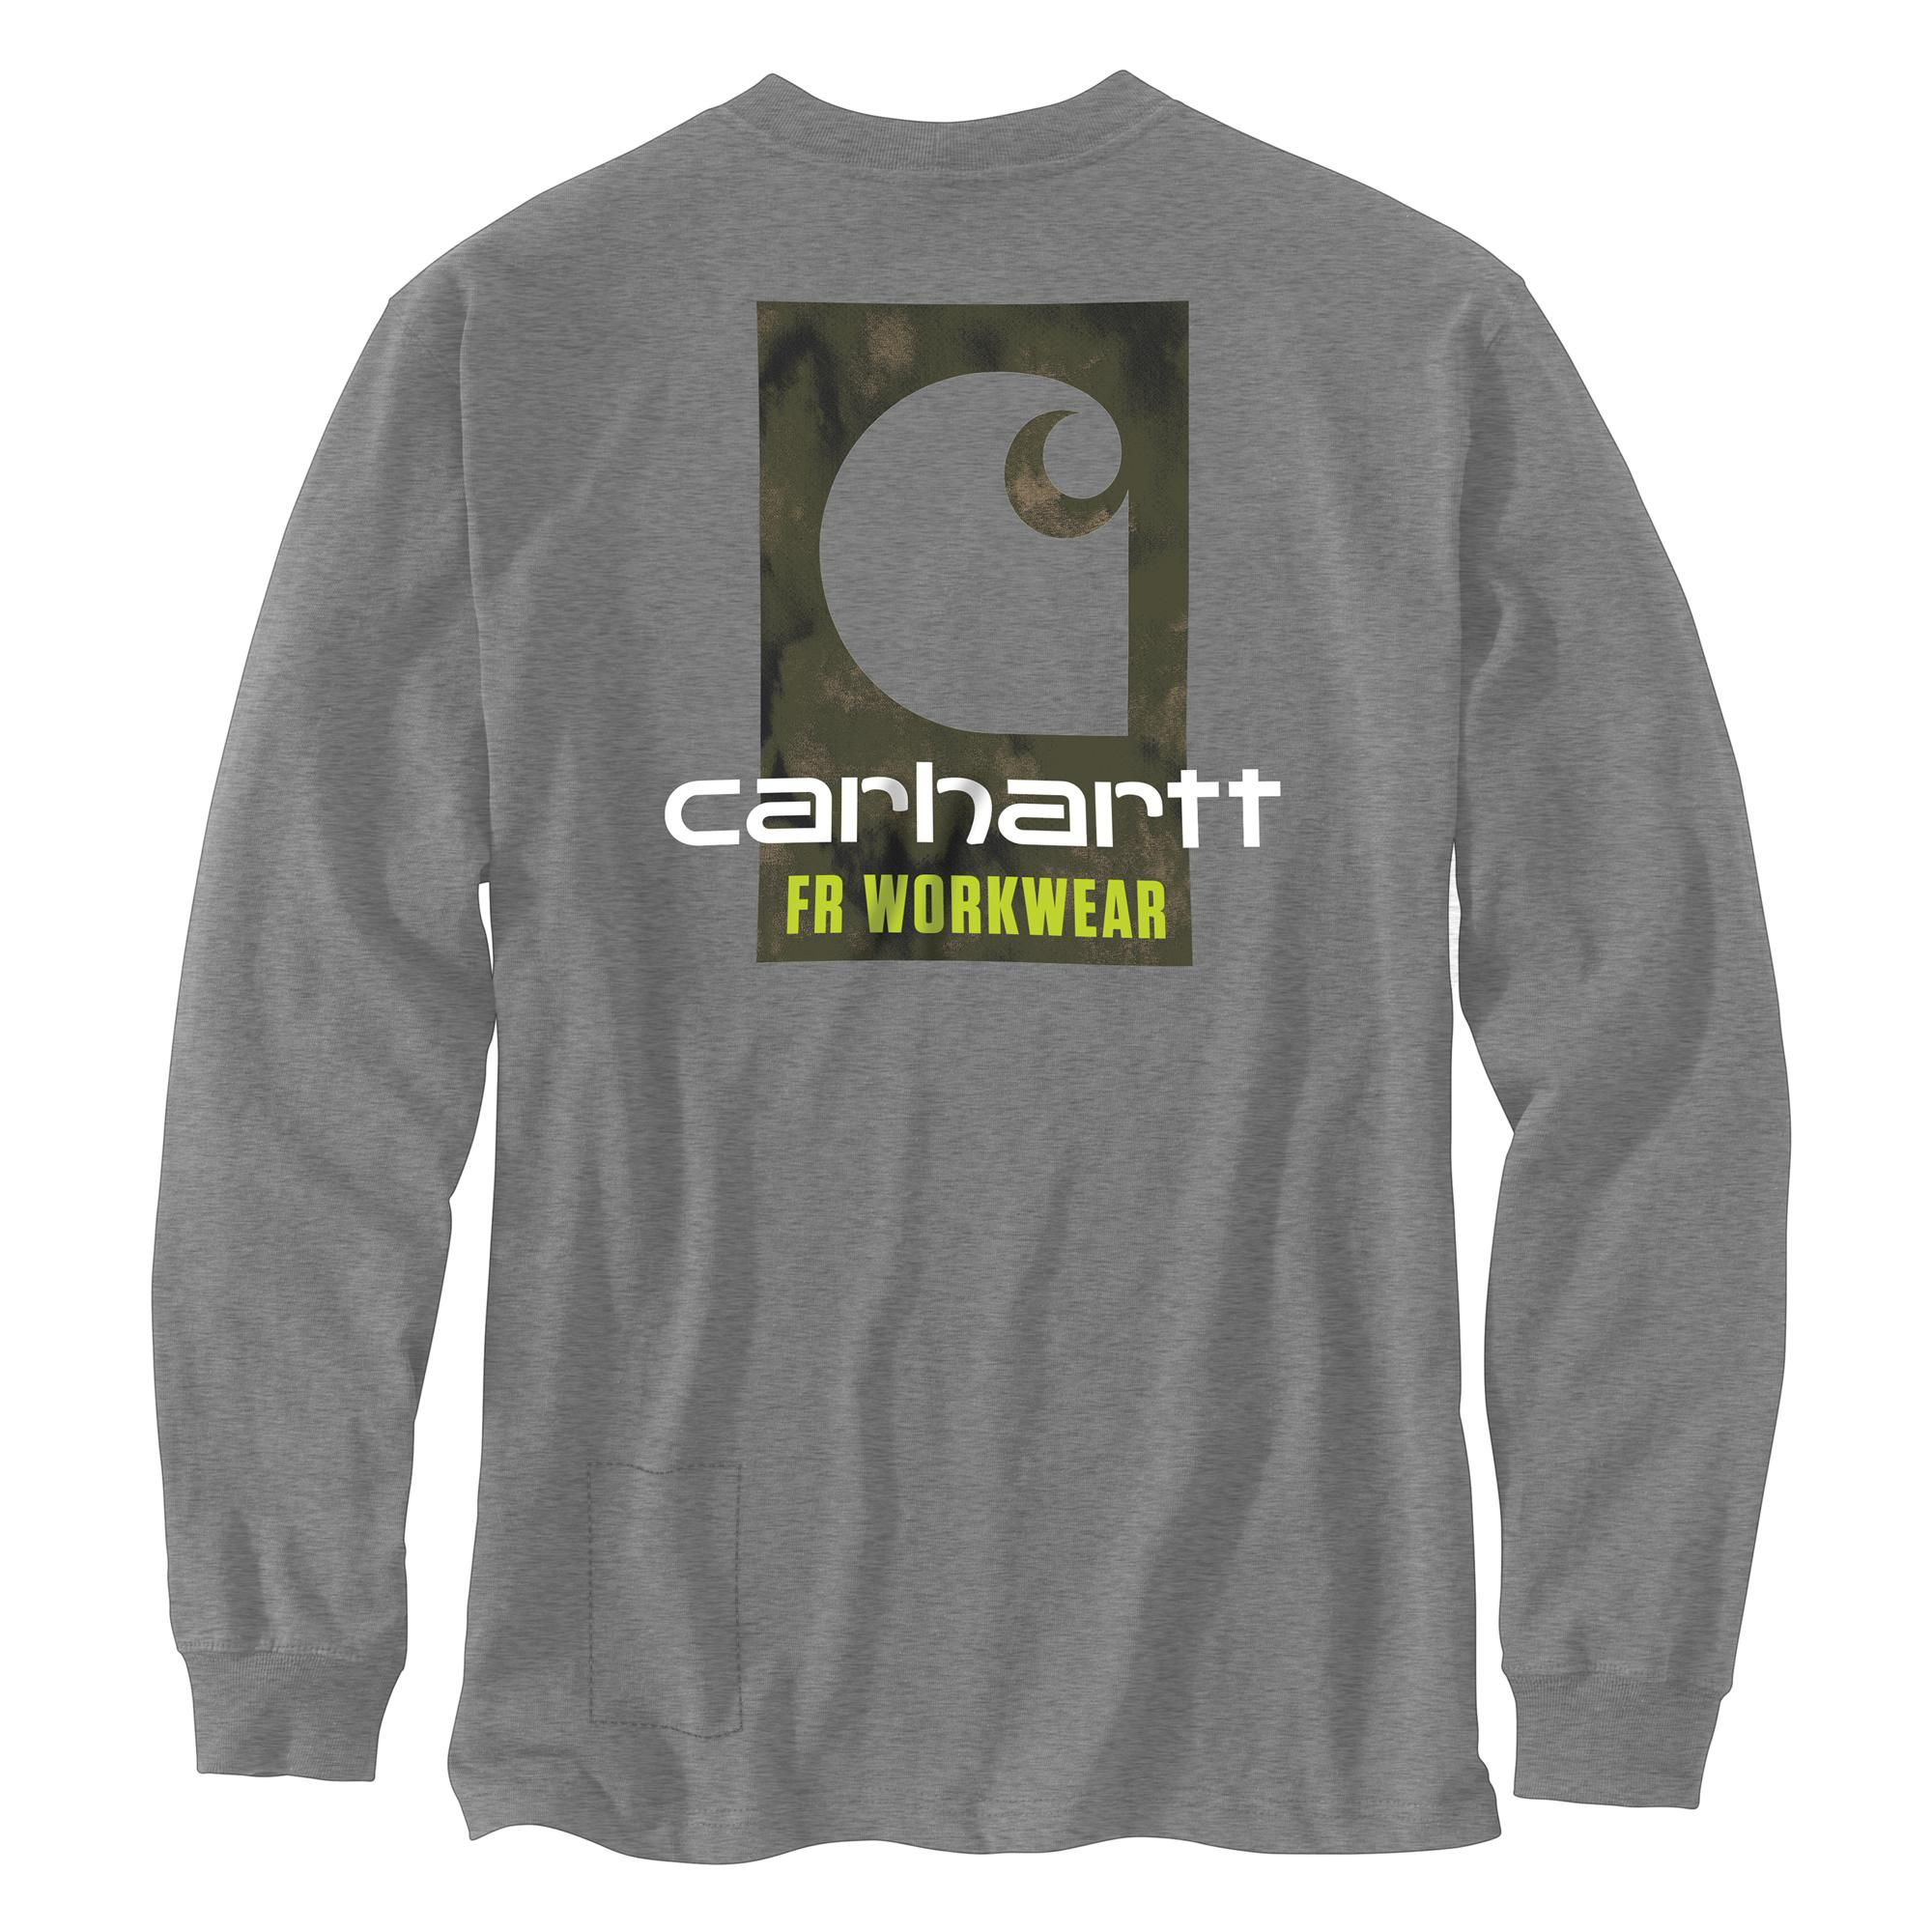 Carhartt Force Loose-Fit Lightweight Flame-Resistant C Graphic Long-Sleeve T-Shirt for Men - Granite Heather - 3XL